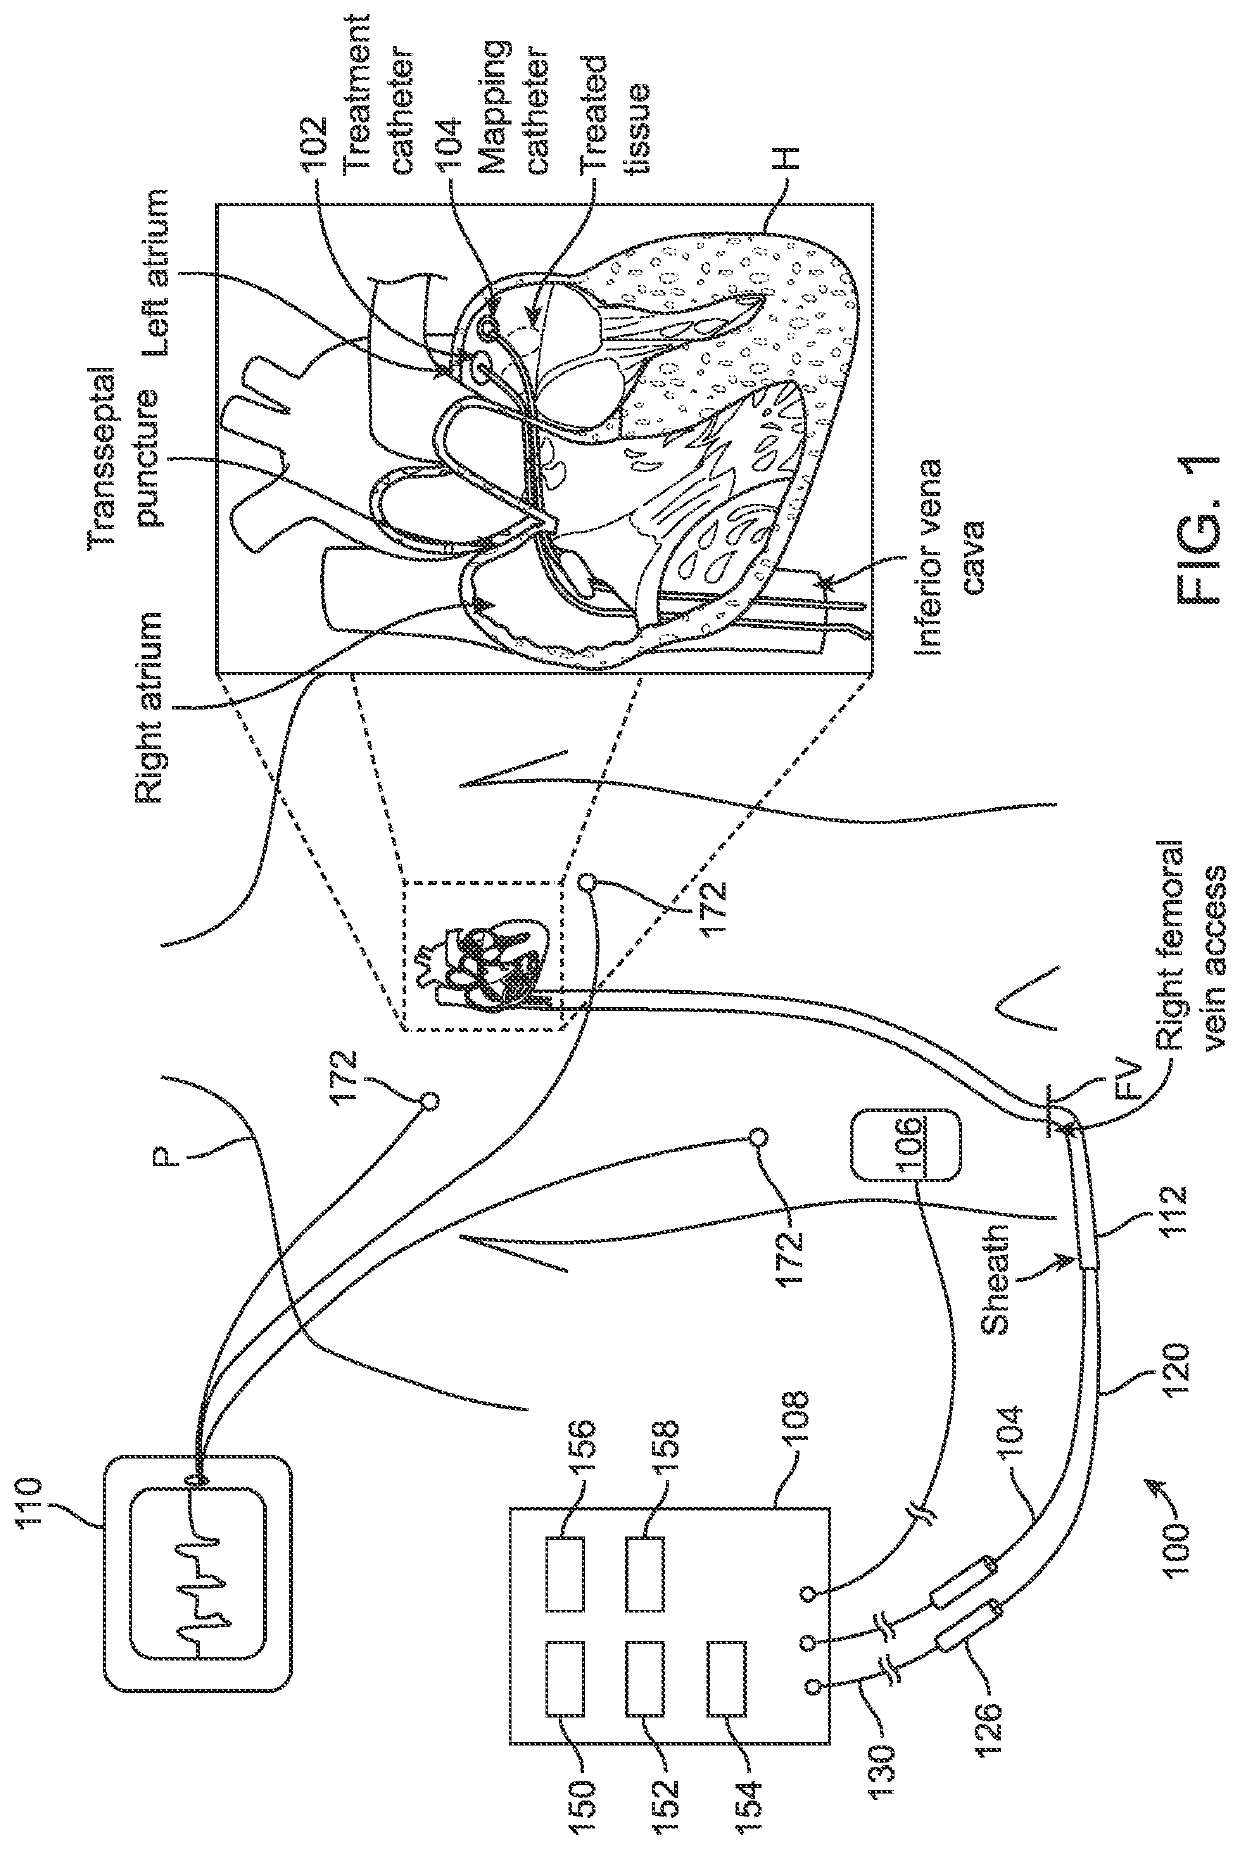 Treatment of cardiac tissue with pulsed electric fields